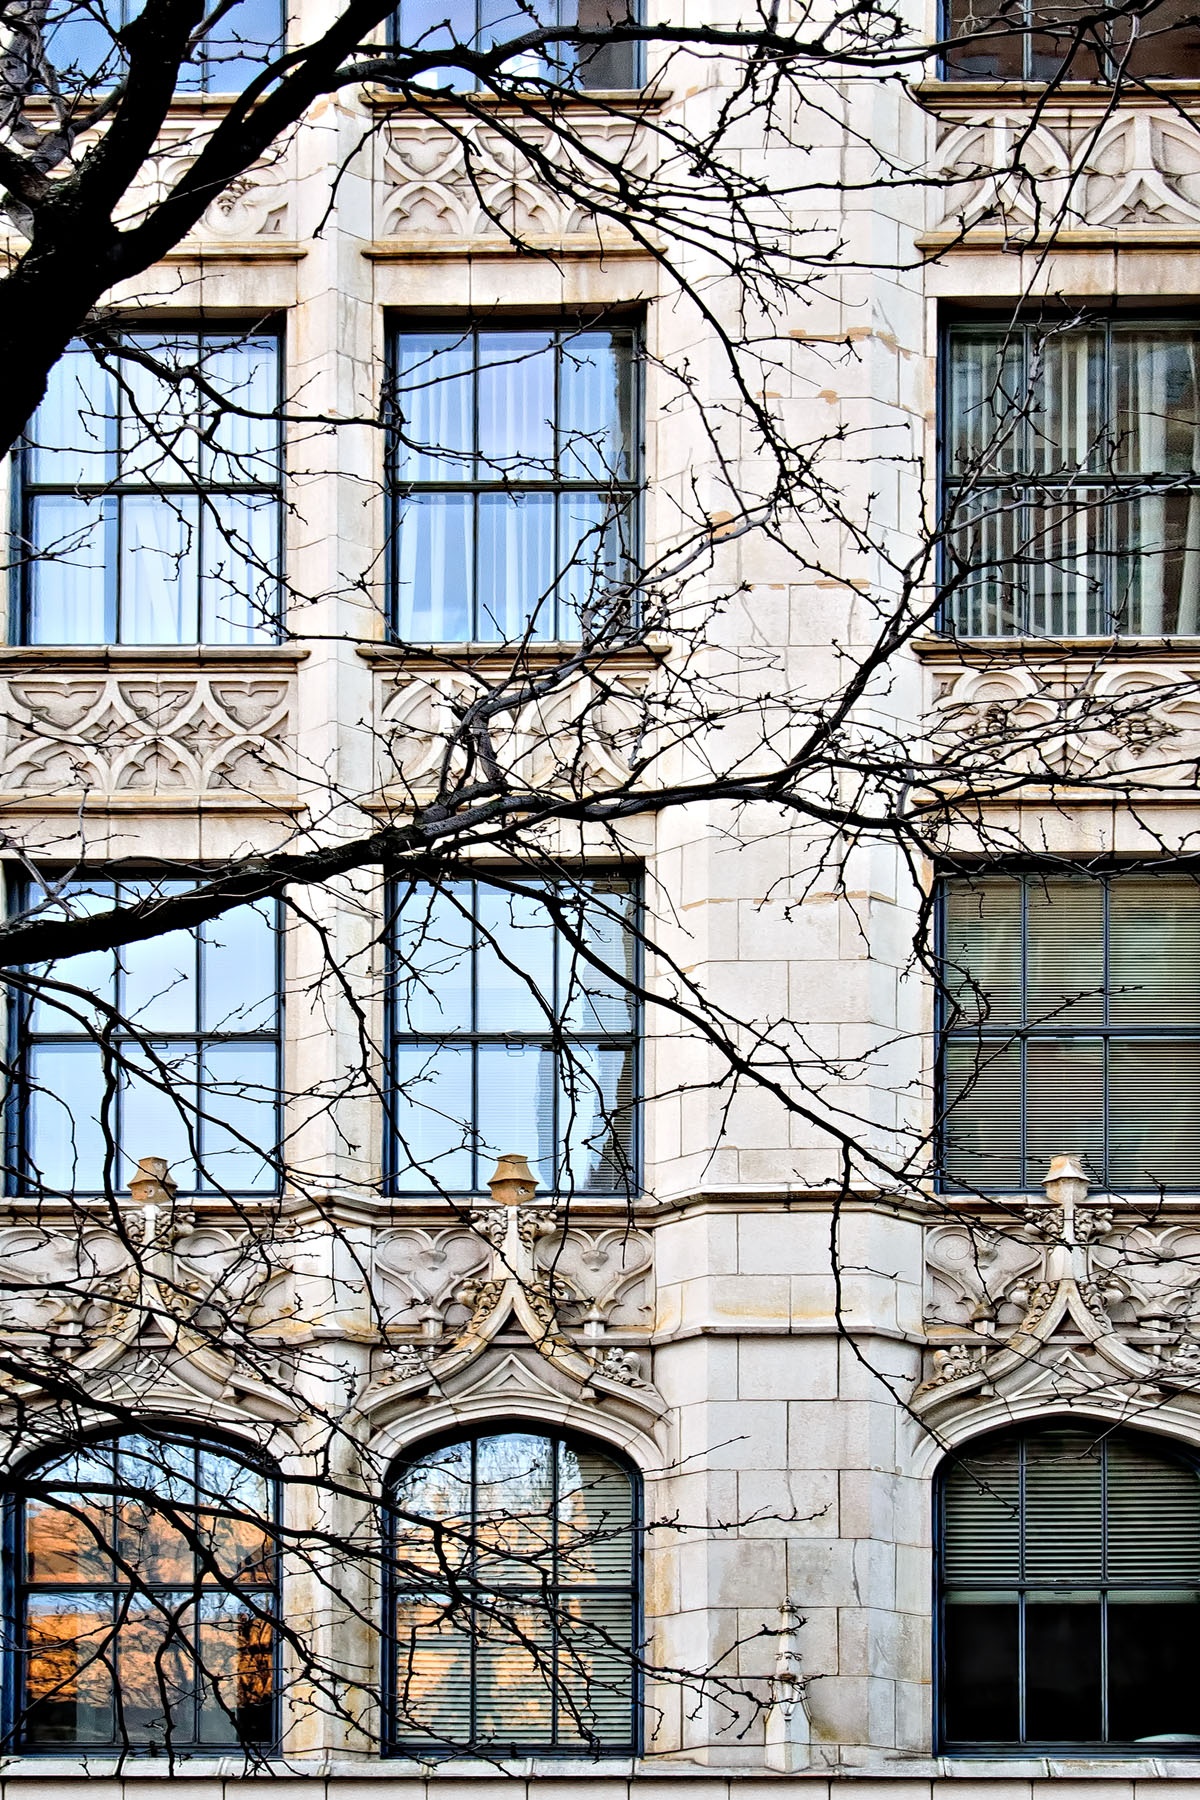 TREE AND WINDOWS - I just couldn't pass up this "winter only" view of a building in Cincinnati.